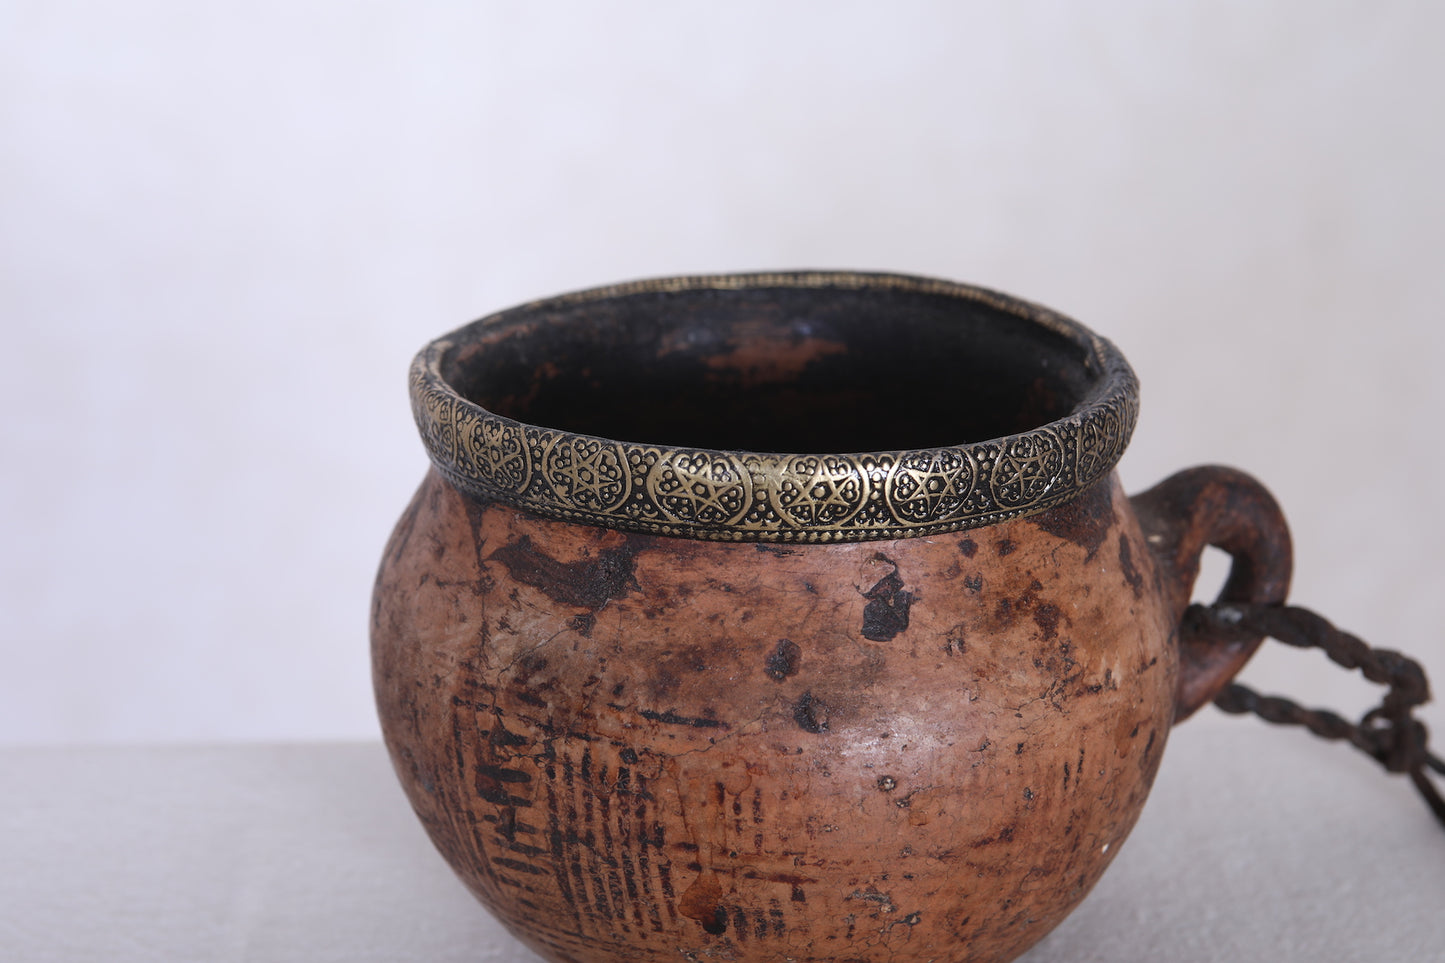 Antique moroccan clay water pot 5.1 INCHES X 4.1 INCHES